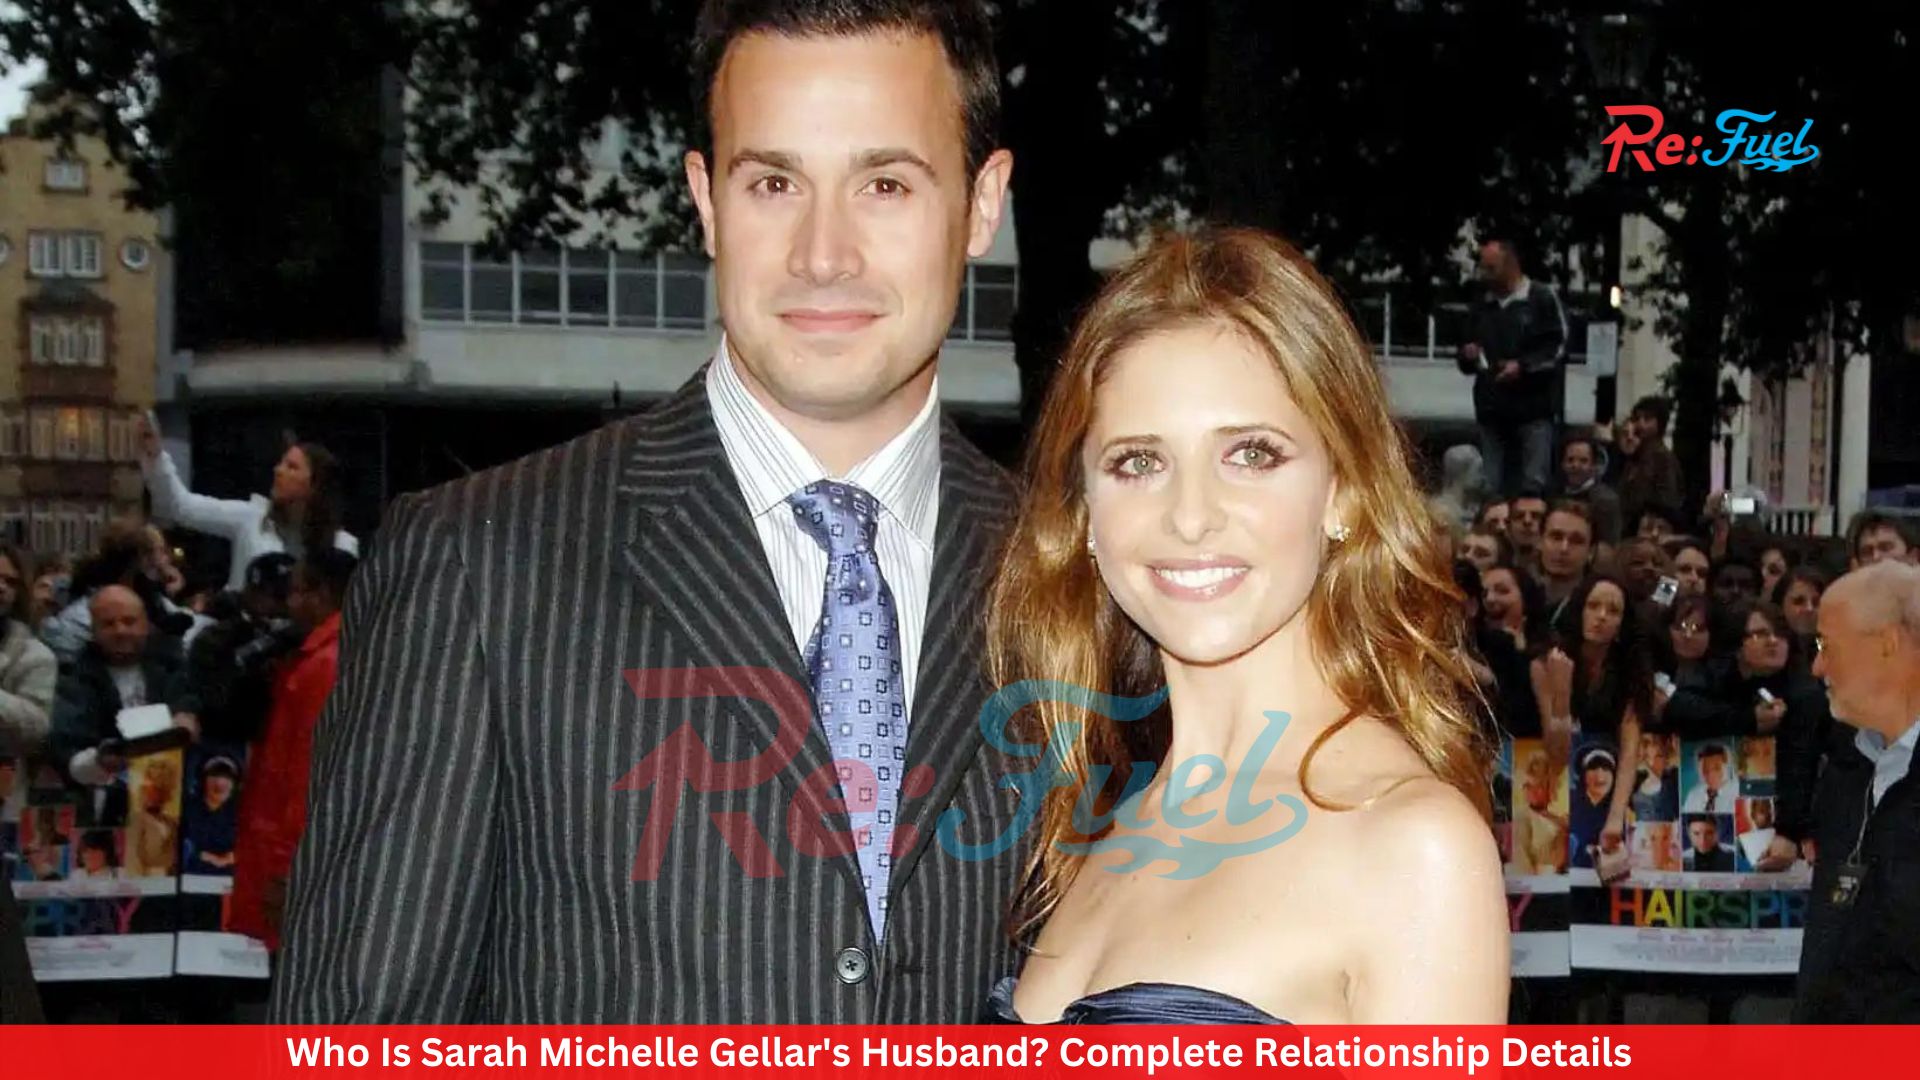 Who Is Sarah Michelle Gellar's Husband? Complete Relationship Details